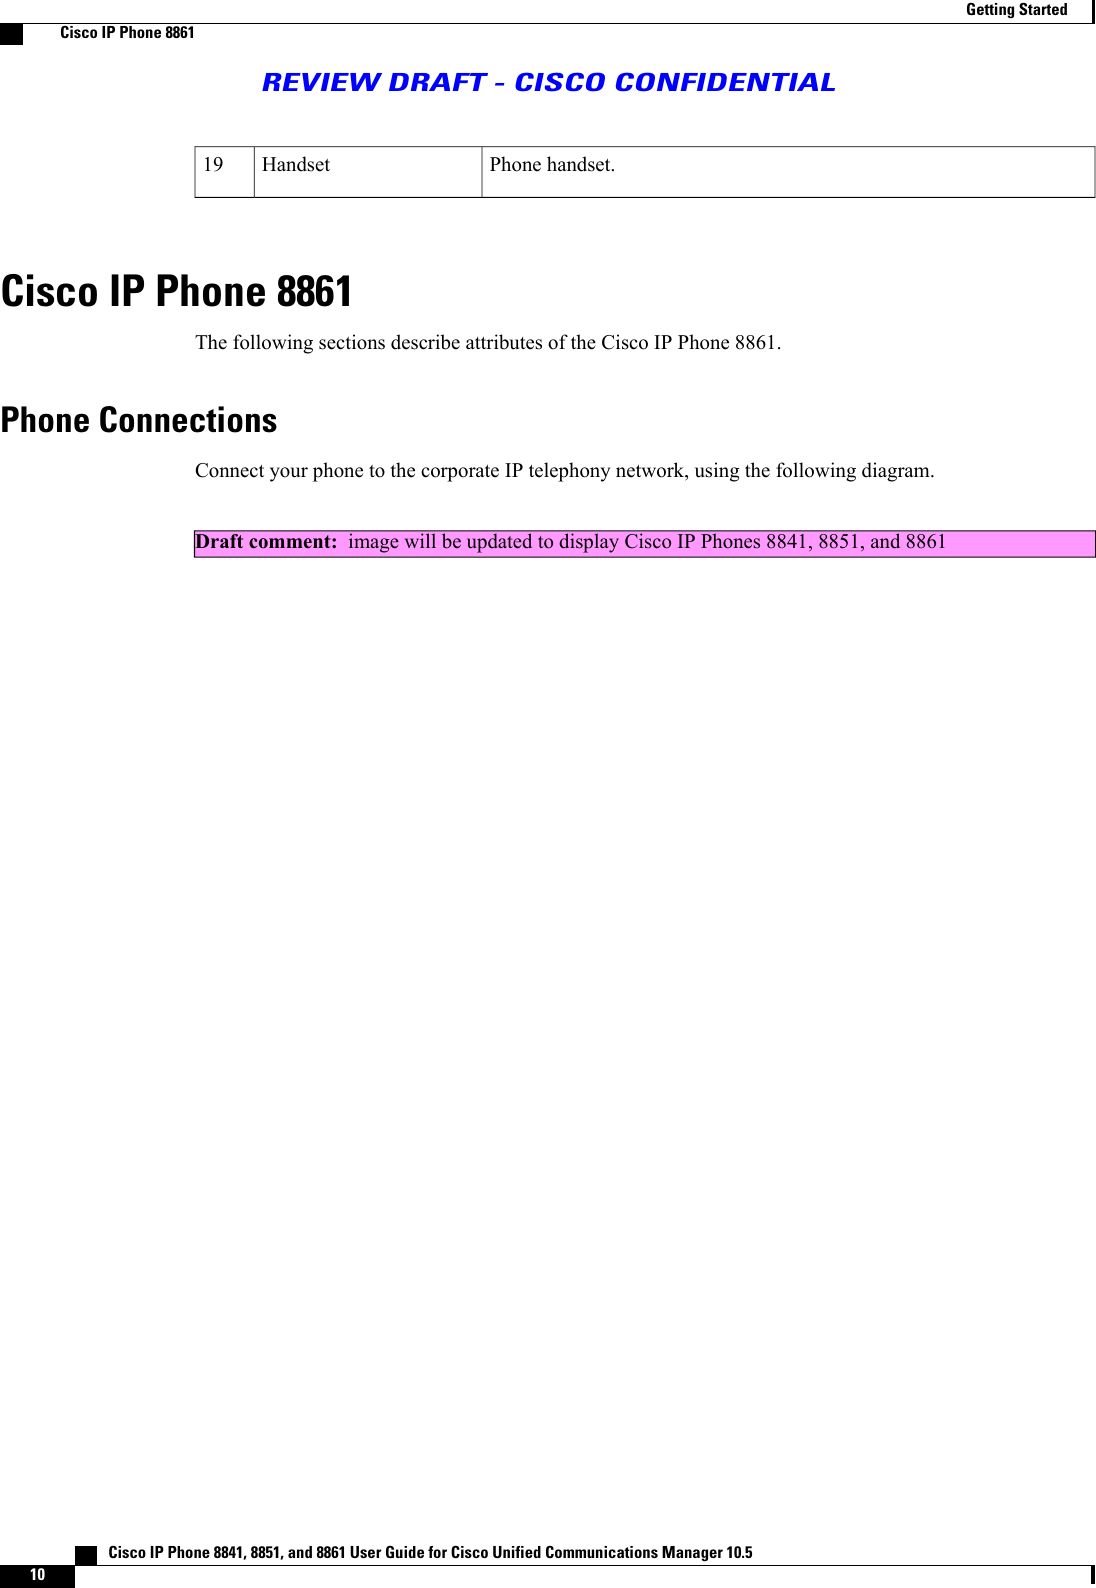 Phone handset.Handset19Cisco IP Phone 8861The following sections describe attributes of the Cisco IP Phone 8861.Phone ConnectionsConnect your phone to the corporate IP telephony network, using the following diagram.Draft comment: image will be updated to display Cisco IP Phones 8841, 8851, and 8861   Cisco IP Phone 8841, 8851, and 8861 User Guide for Cisco Unified Communications Manager 10.510Getting StartedCisco IP Phone 8861REVIEW DRAFT - CISCO CONFIDENTIAL